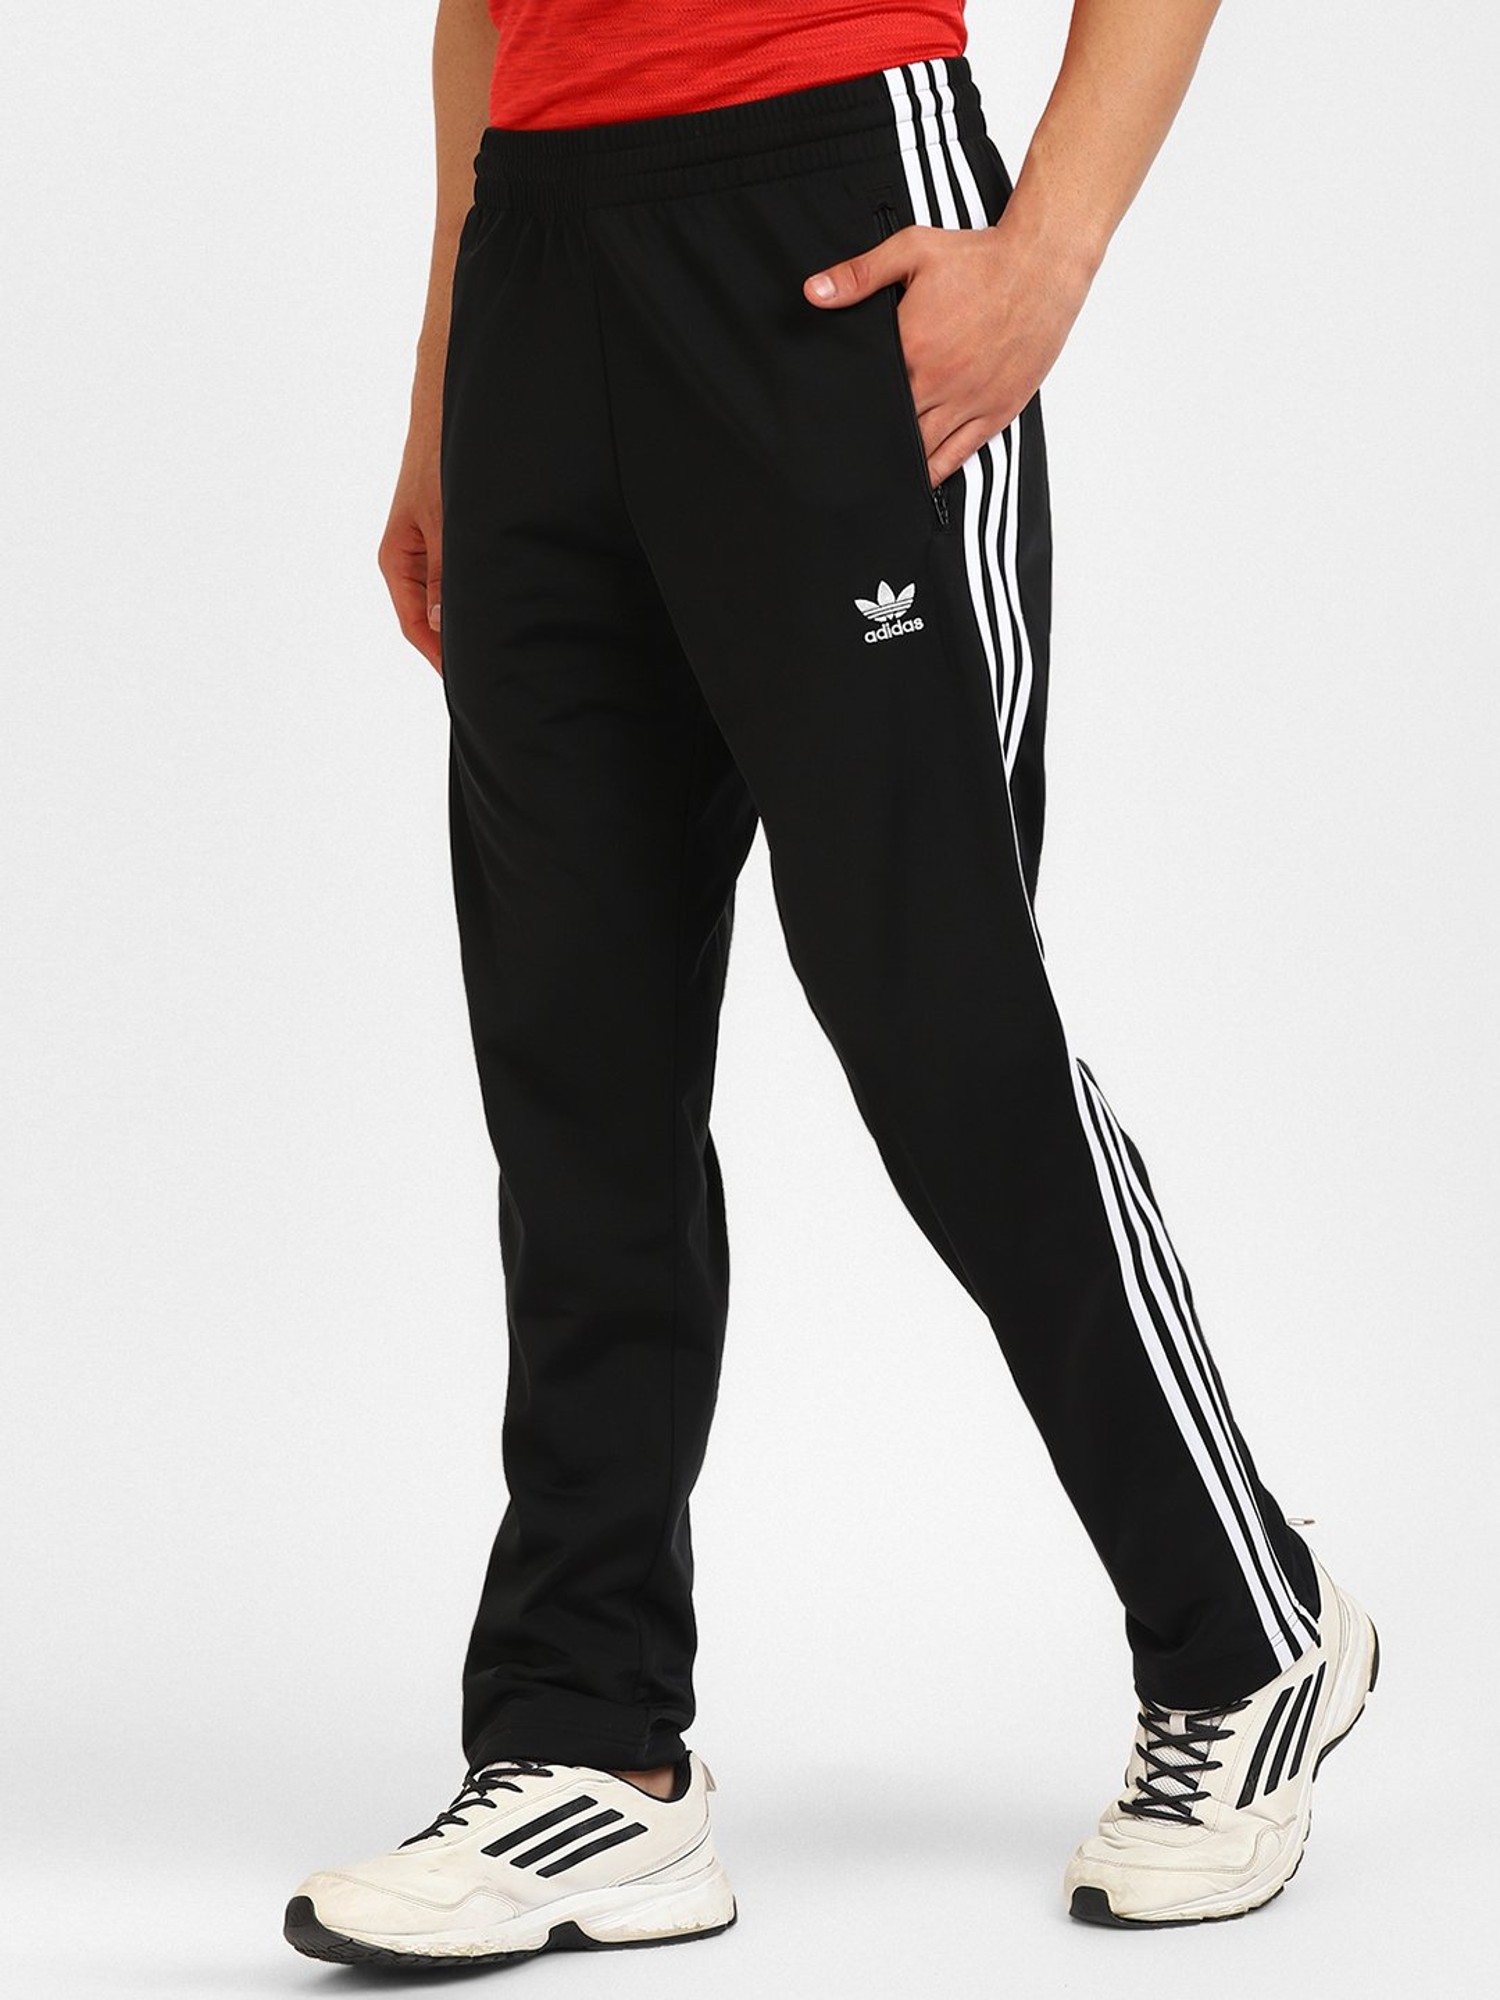 Originals Trousers and Pants  adidas India